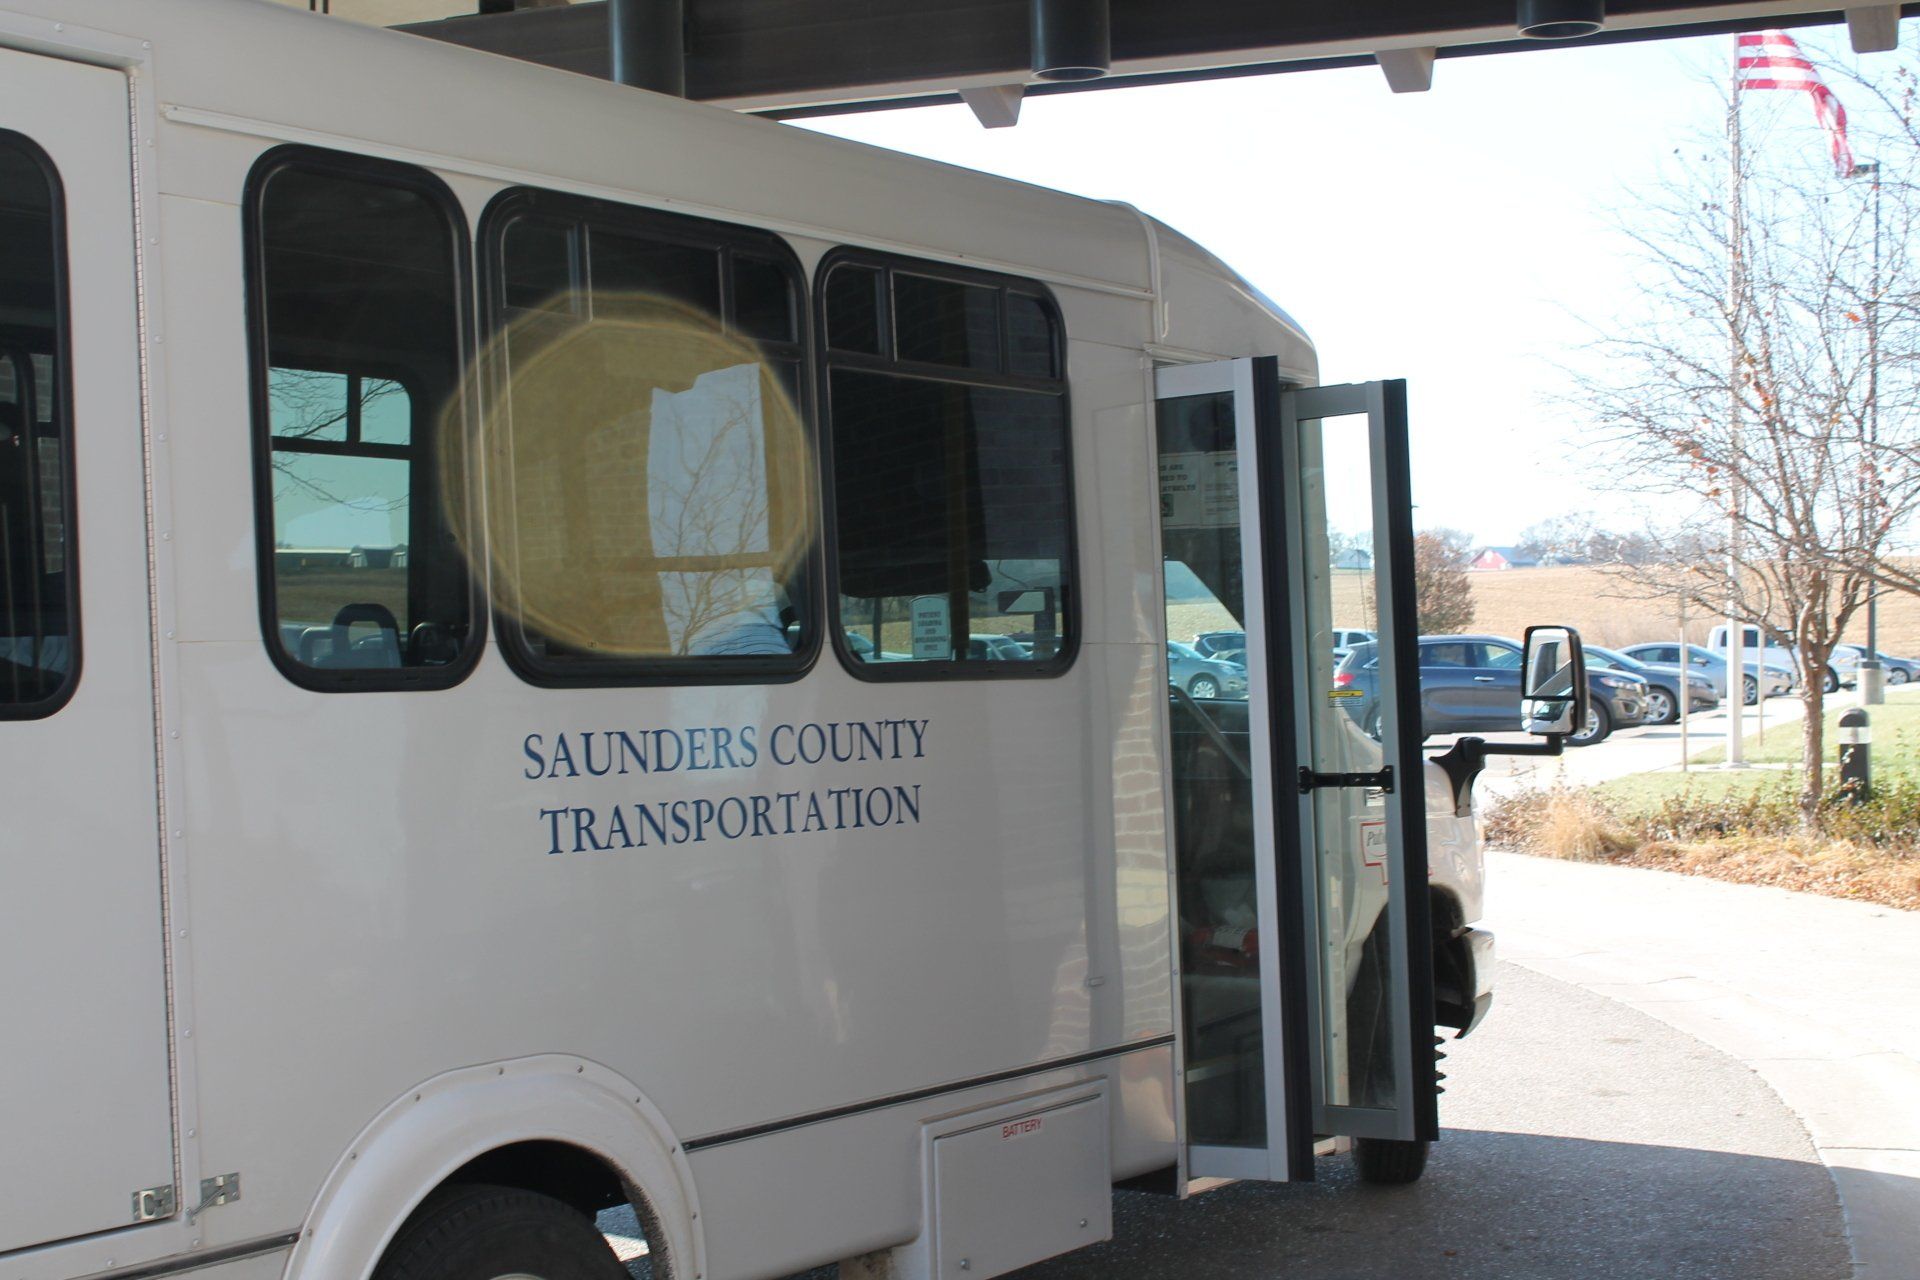 photo of a Saunders County Transportation shuttle bus